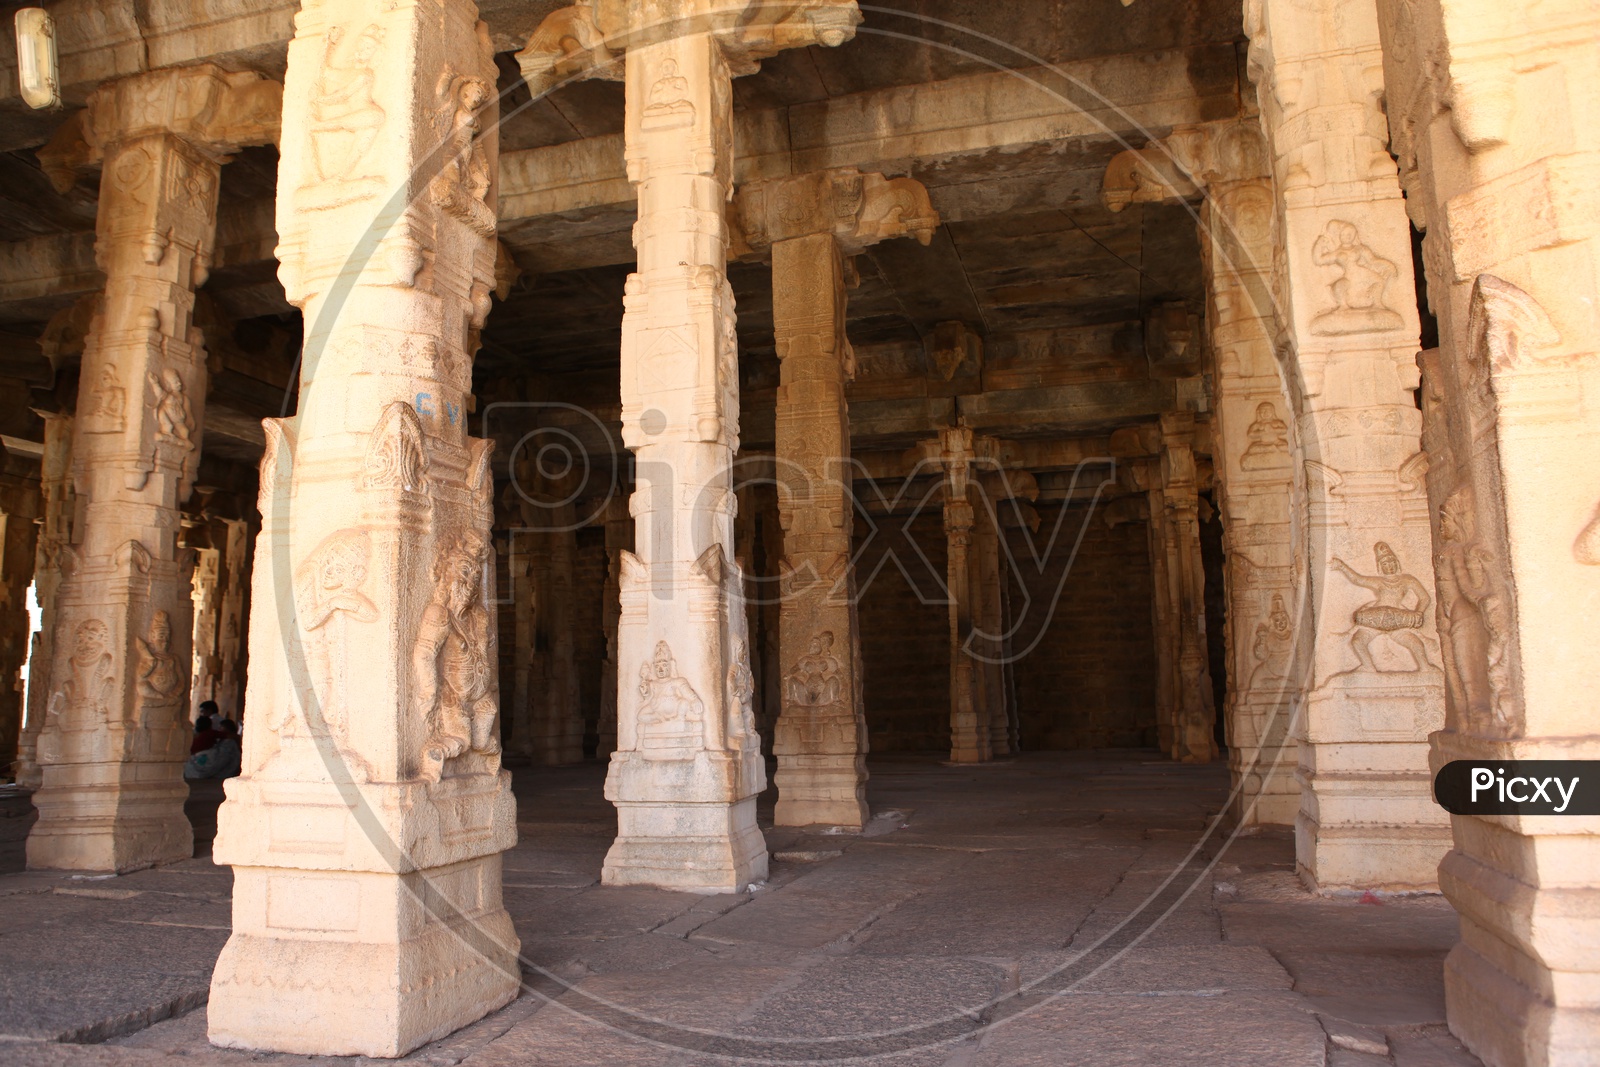 Carved pillars of the ancient temple